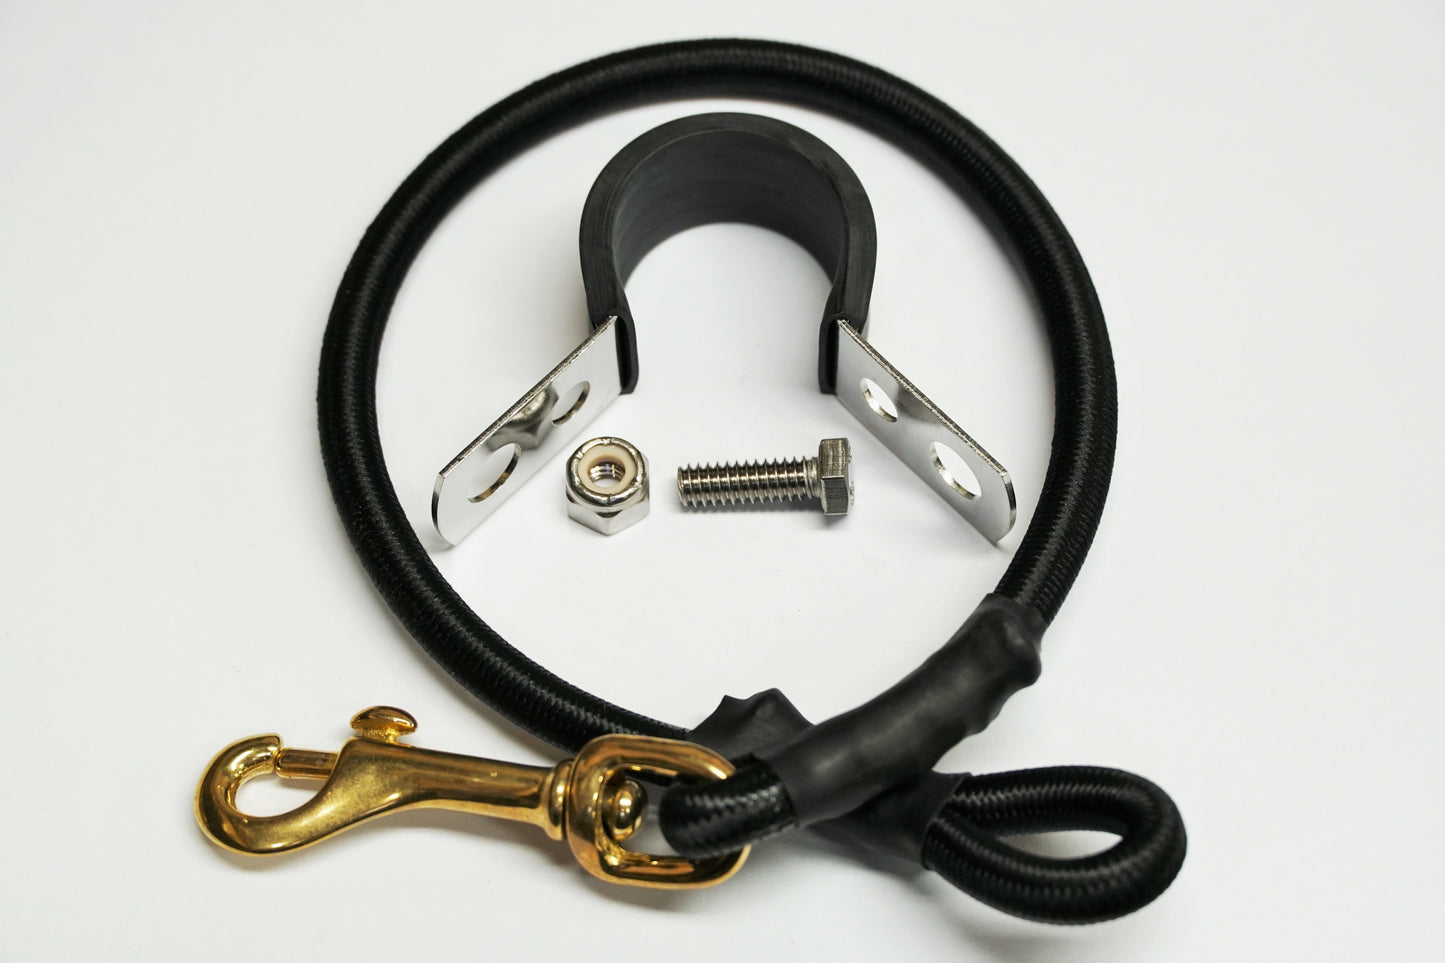 EZ-Steer Auxiliary Restrictor Cord Assembly - shop.cmpgroup.net